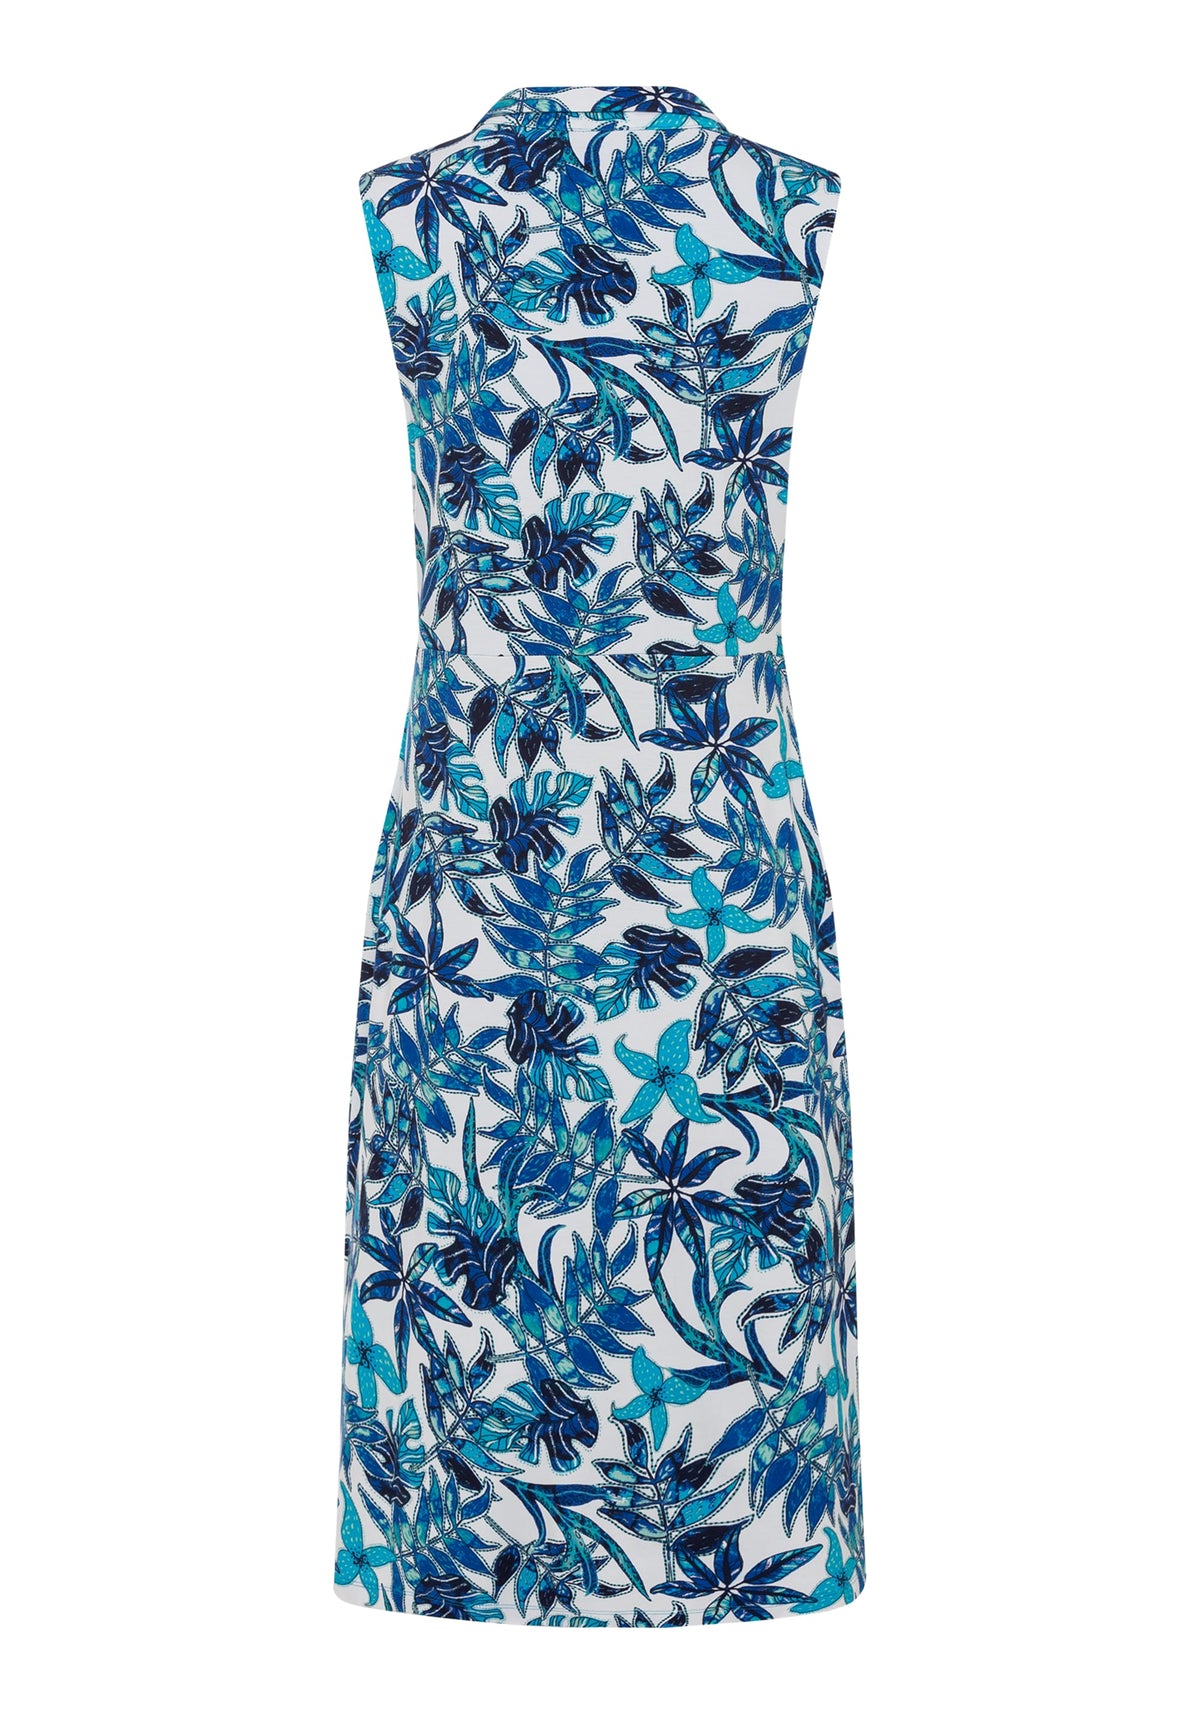 Sleeveless Tropic Floral Faux Wrap Dress containing LENZING™ ECOVERO™